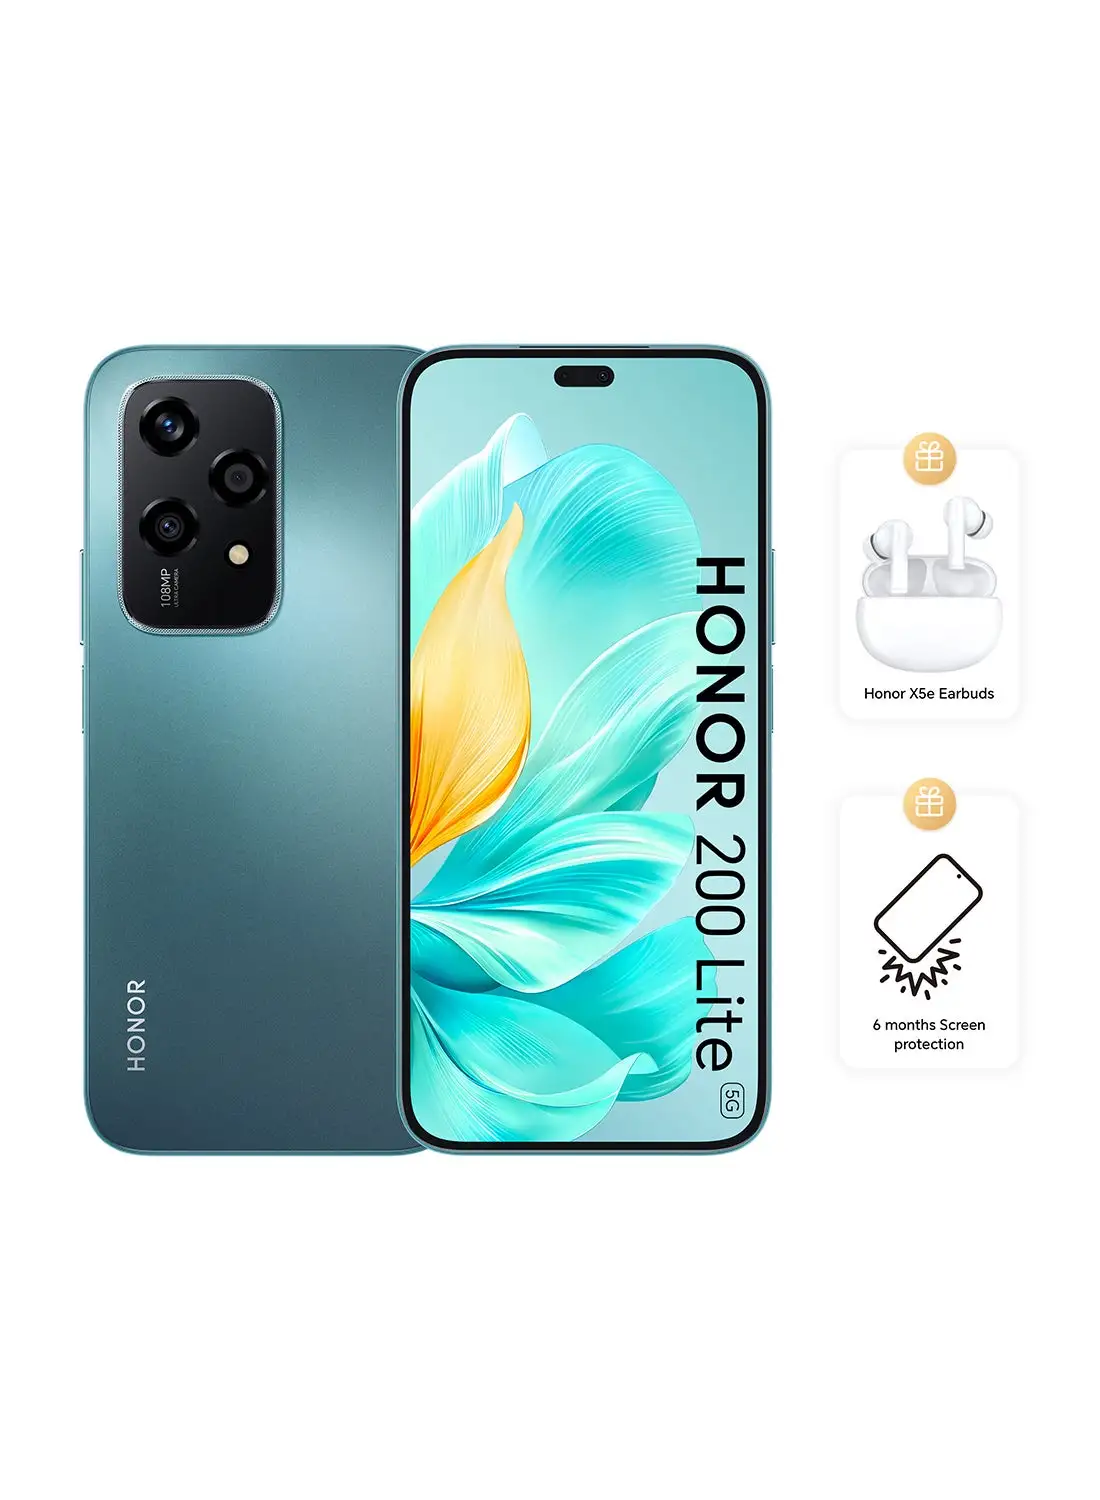 Honor 200 Lite 5G Dual SIM Cyan Lake 8GB RAM + 256GB With FREE Honor X5e Earbuds And 6 Month Screen Protection - Middle East Version